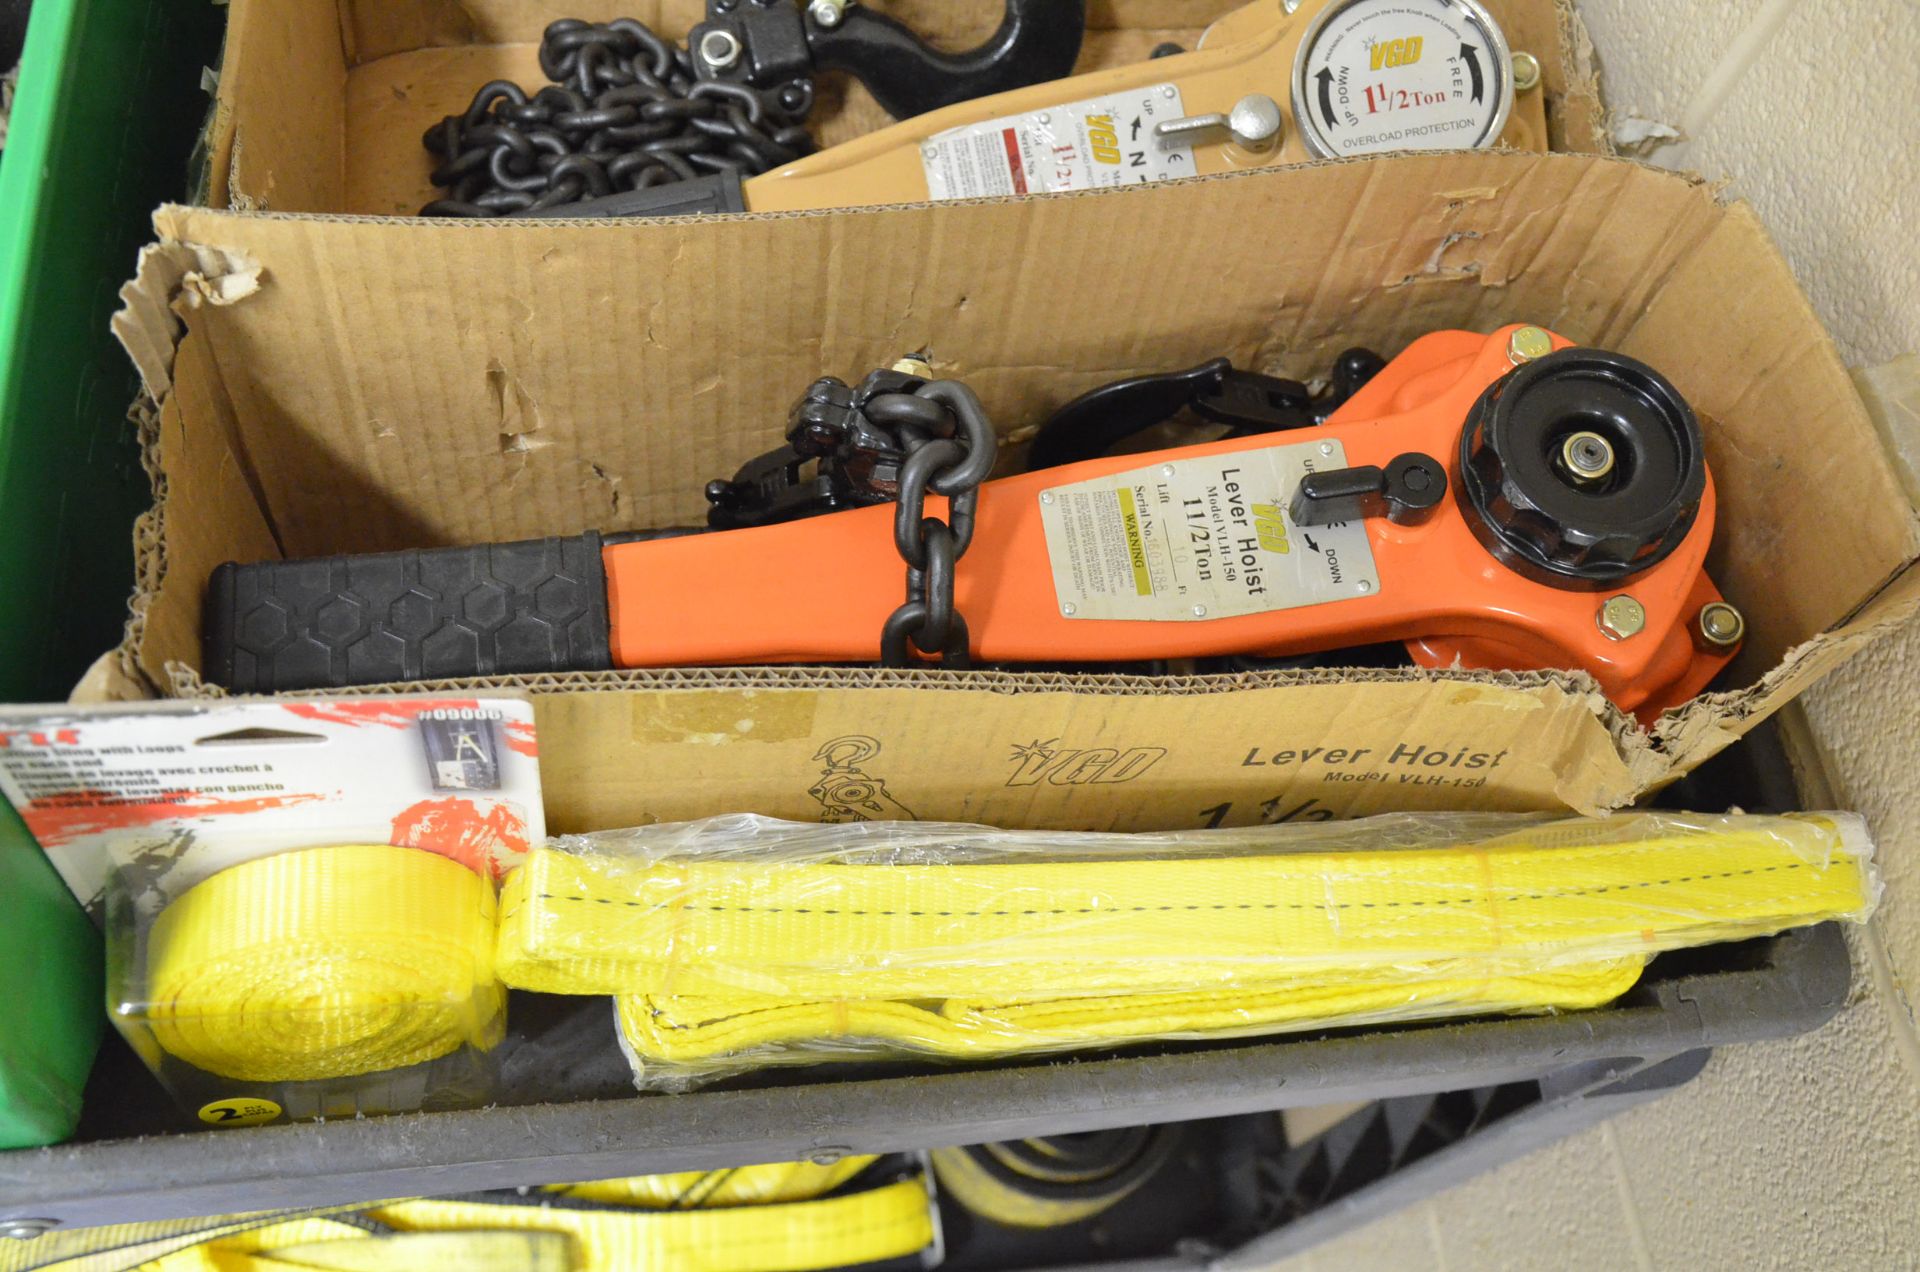 LOT/ (2) VGD 1-1/2 TON COME-A-LONGS, SHACKLES, EYE BOLTS, LIFTING SLINGS AND FALL ARREST HARNESSES - Image 4 of 7